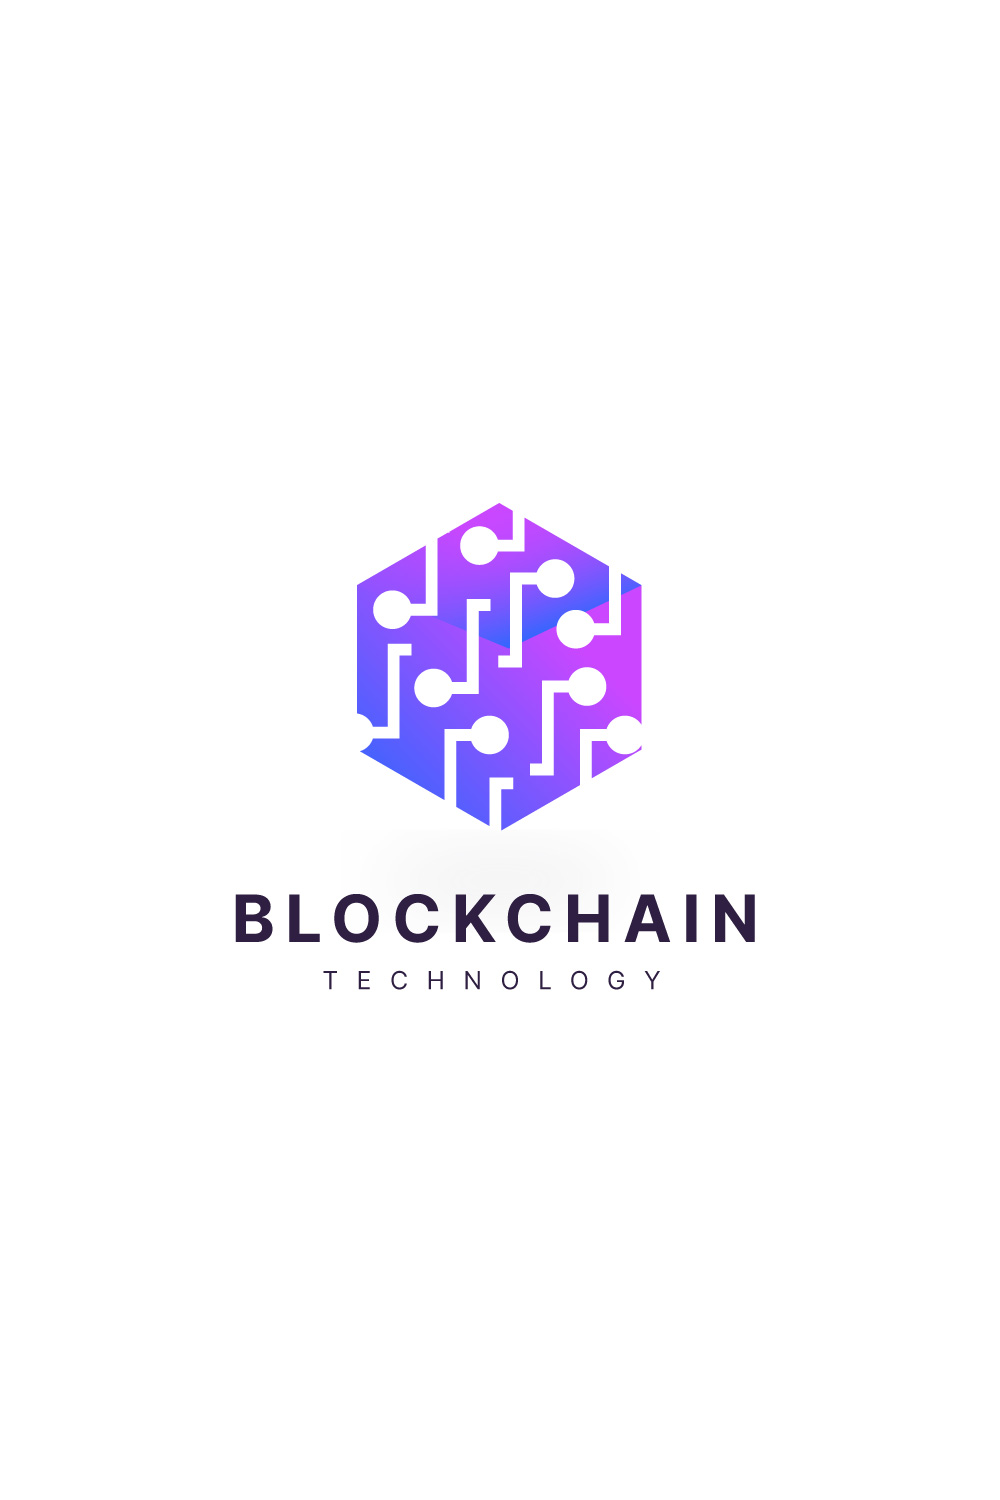 blockchain technology logo, block chain logo, crypto currency logo pinterest preview image.